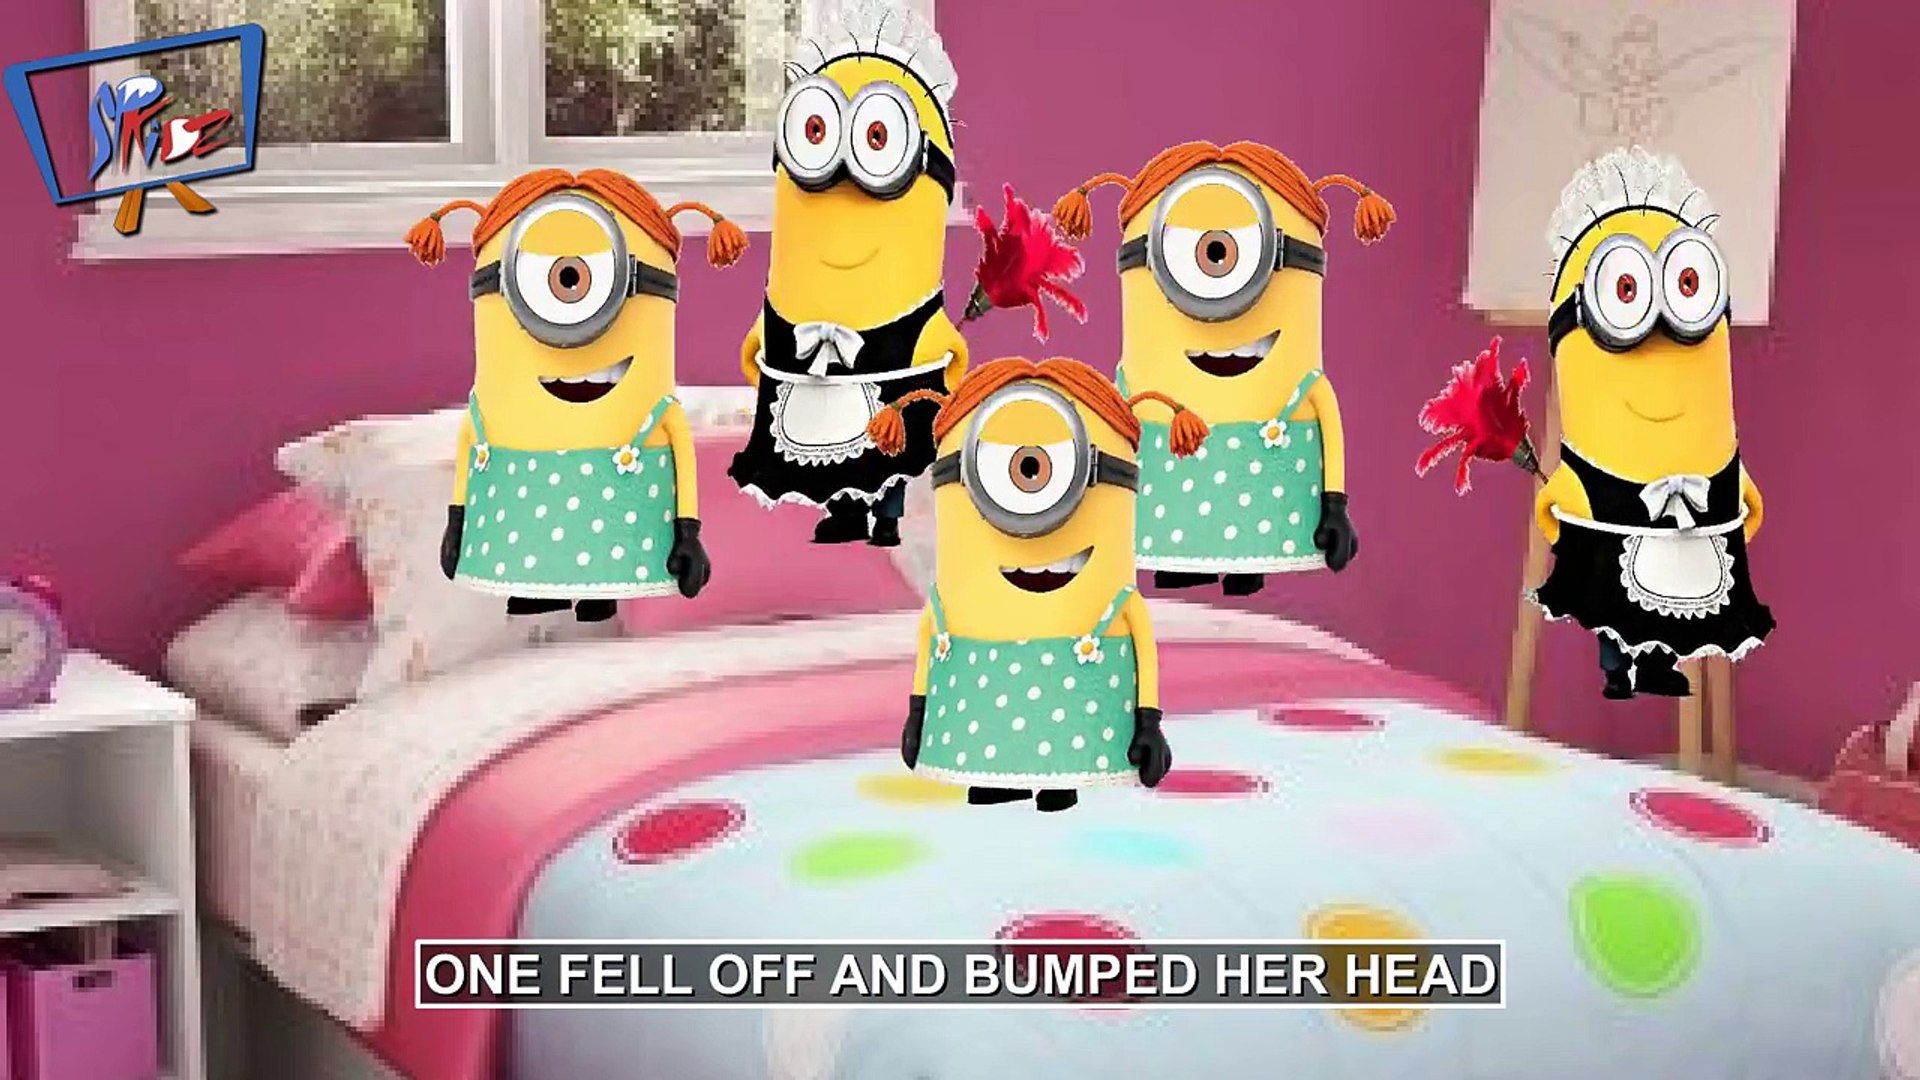 Five little minions jumping on the bed - Dailymotion Video